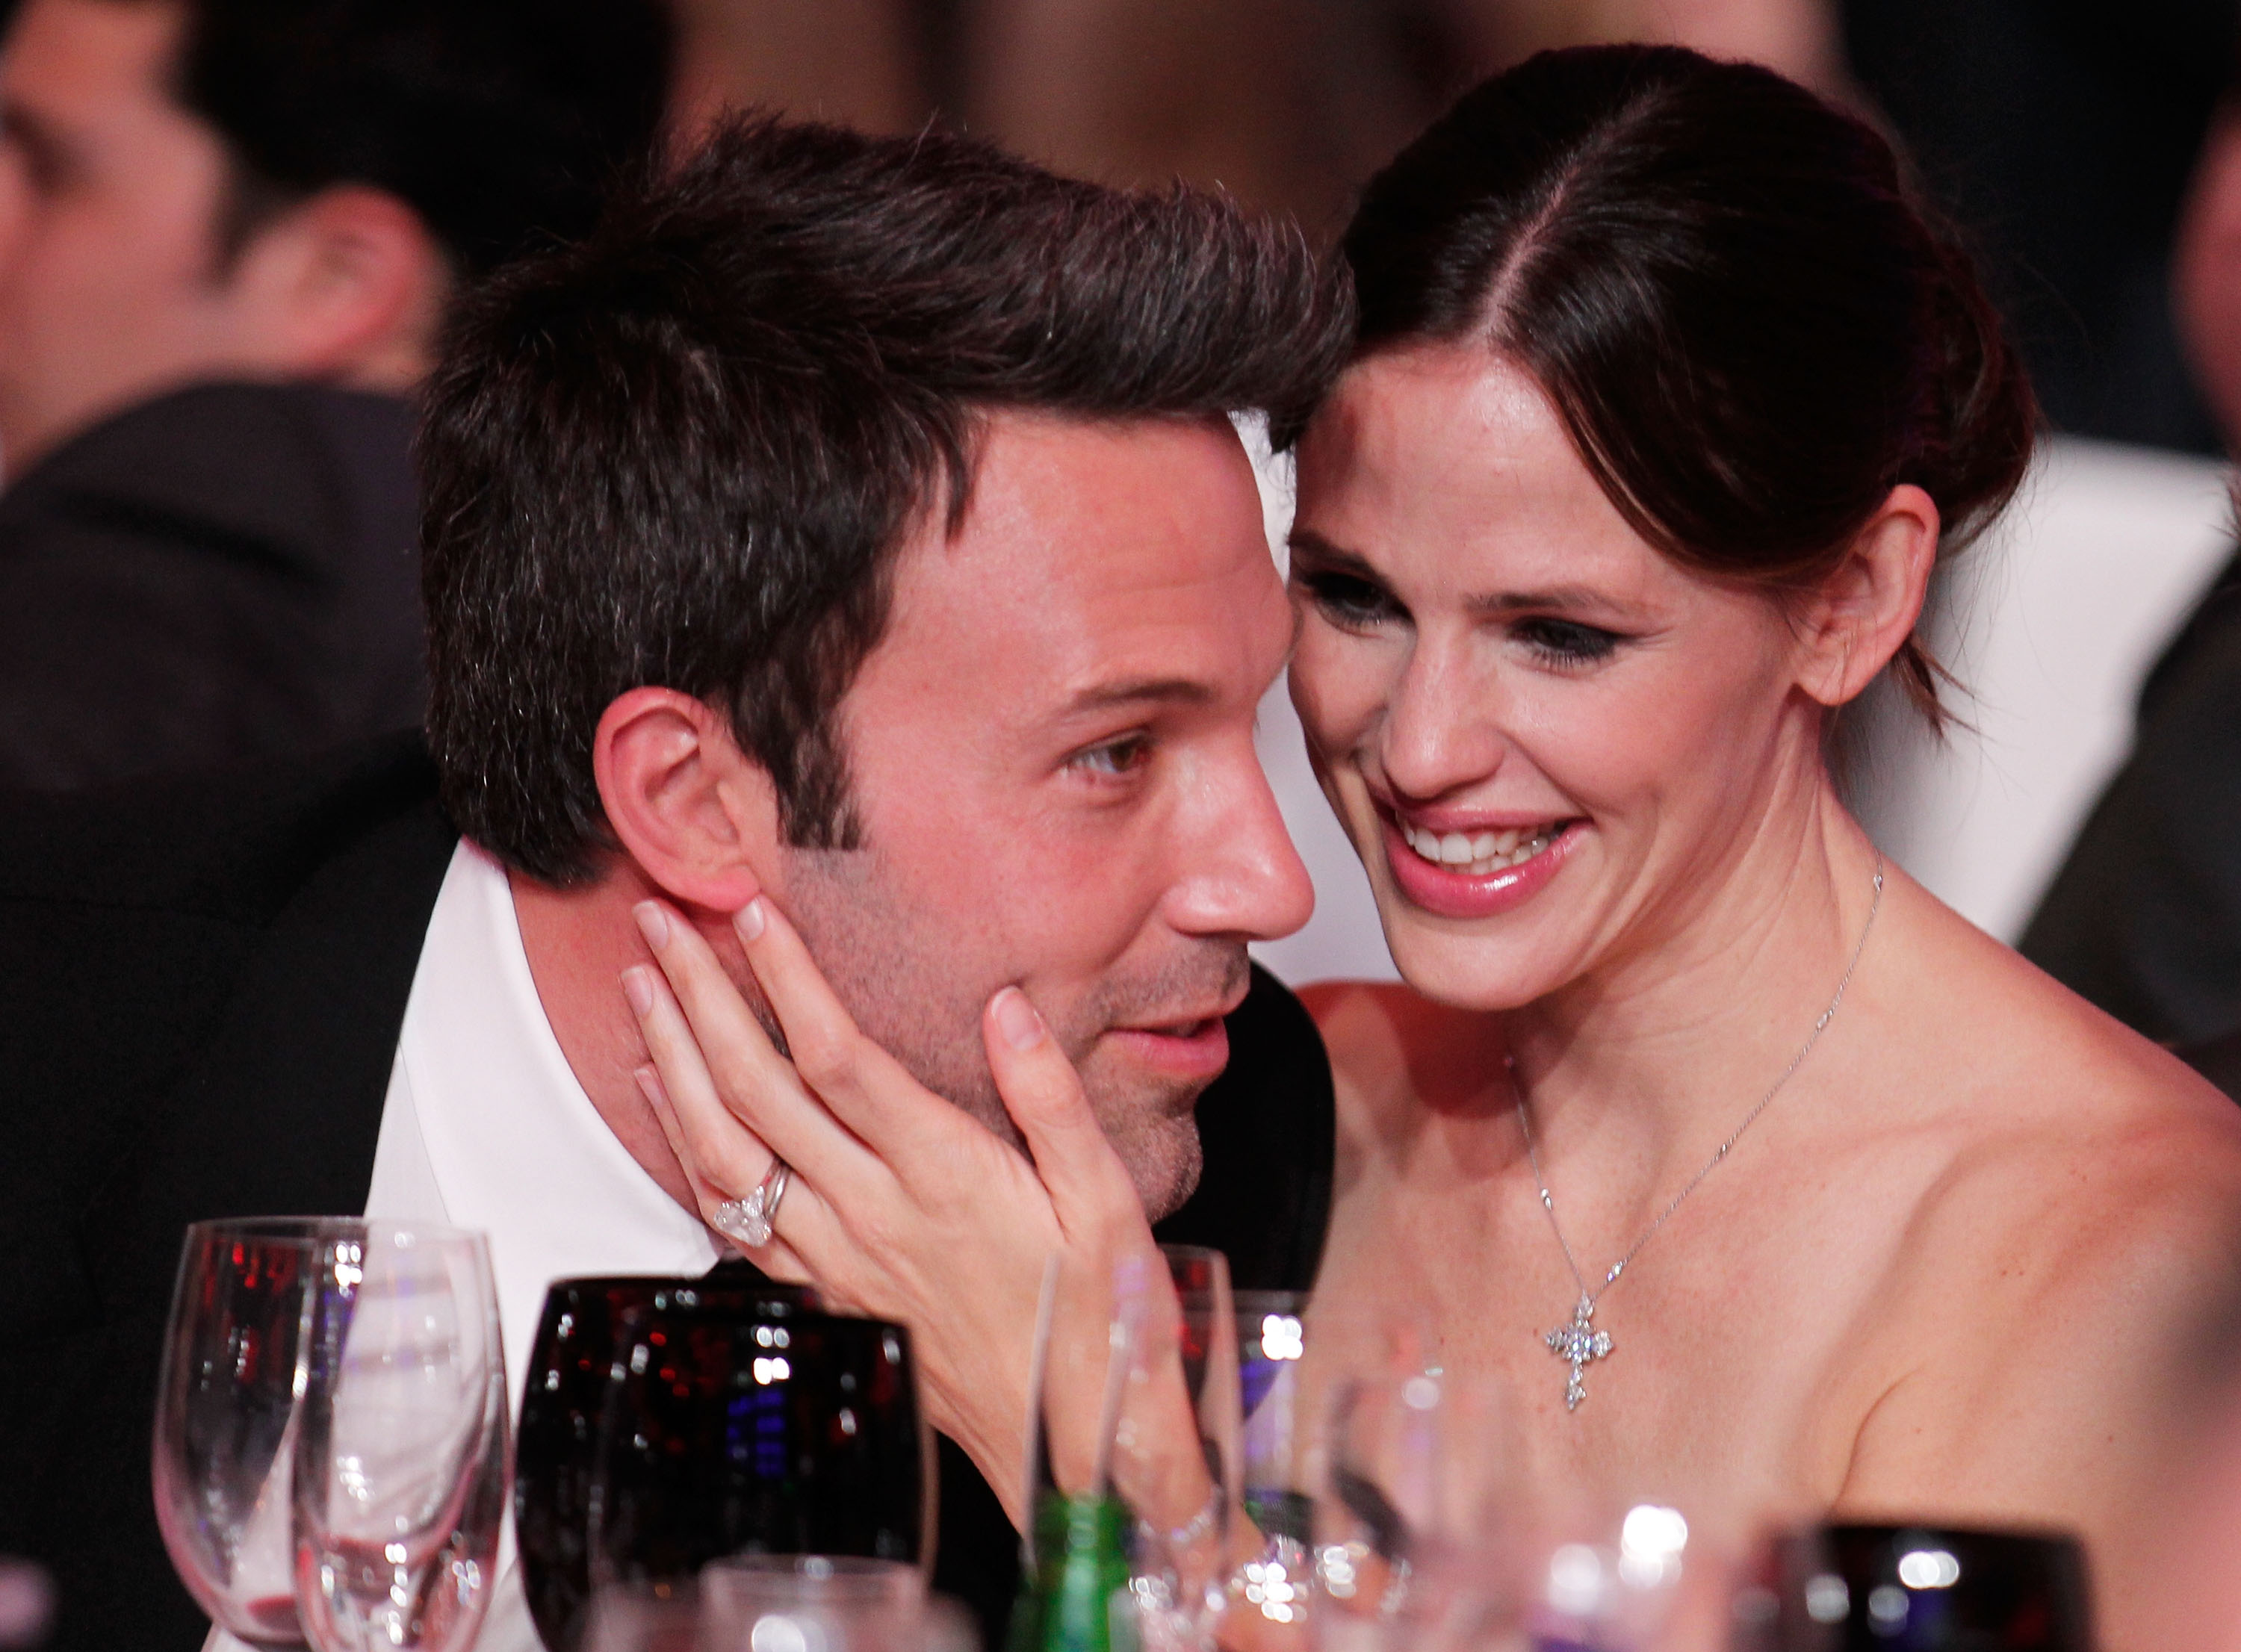 Ben Affleck and Jennifer Garner at the 16th Annual Critics' Choice Movie Awards in Los Angeles, California on January 14, 2011 | Source: Getty Images